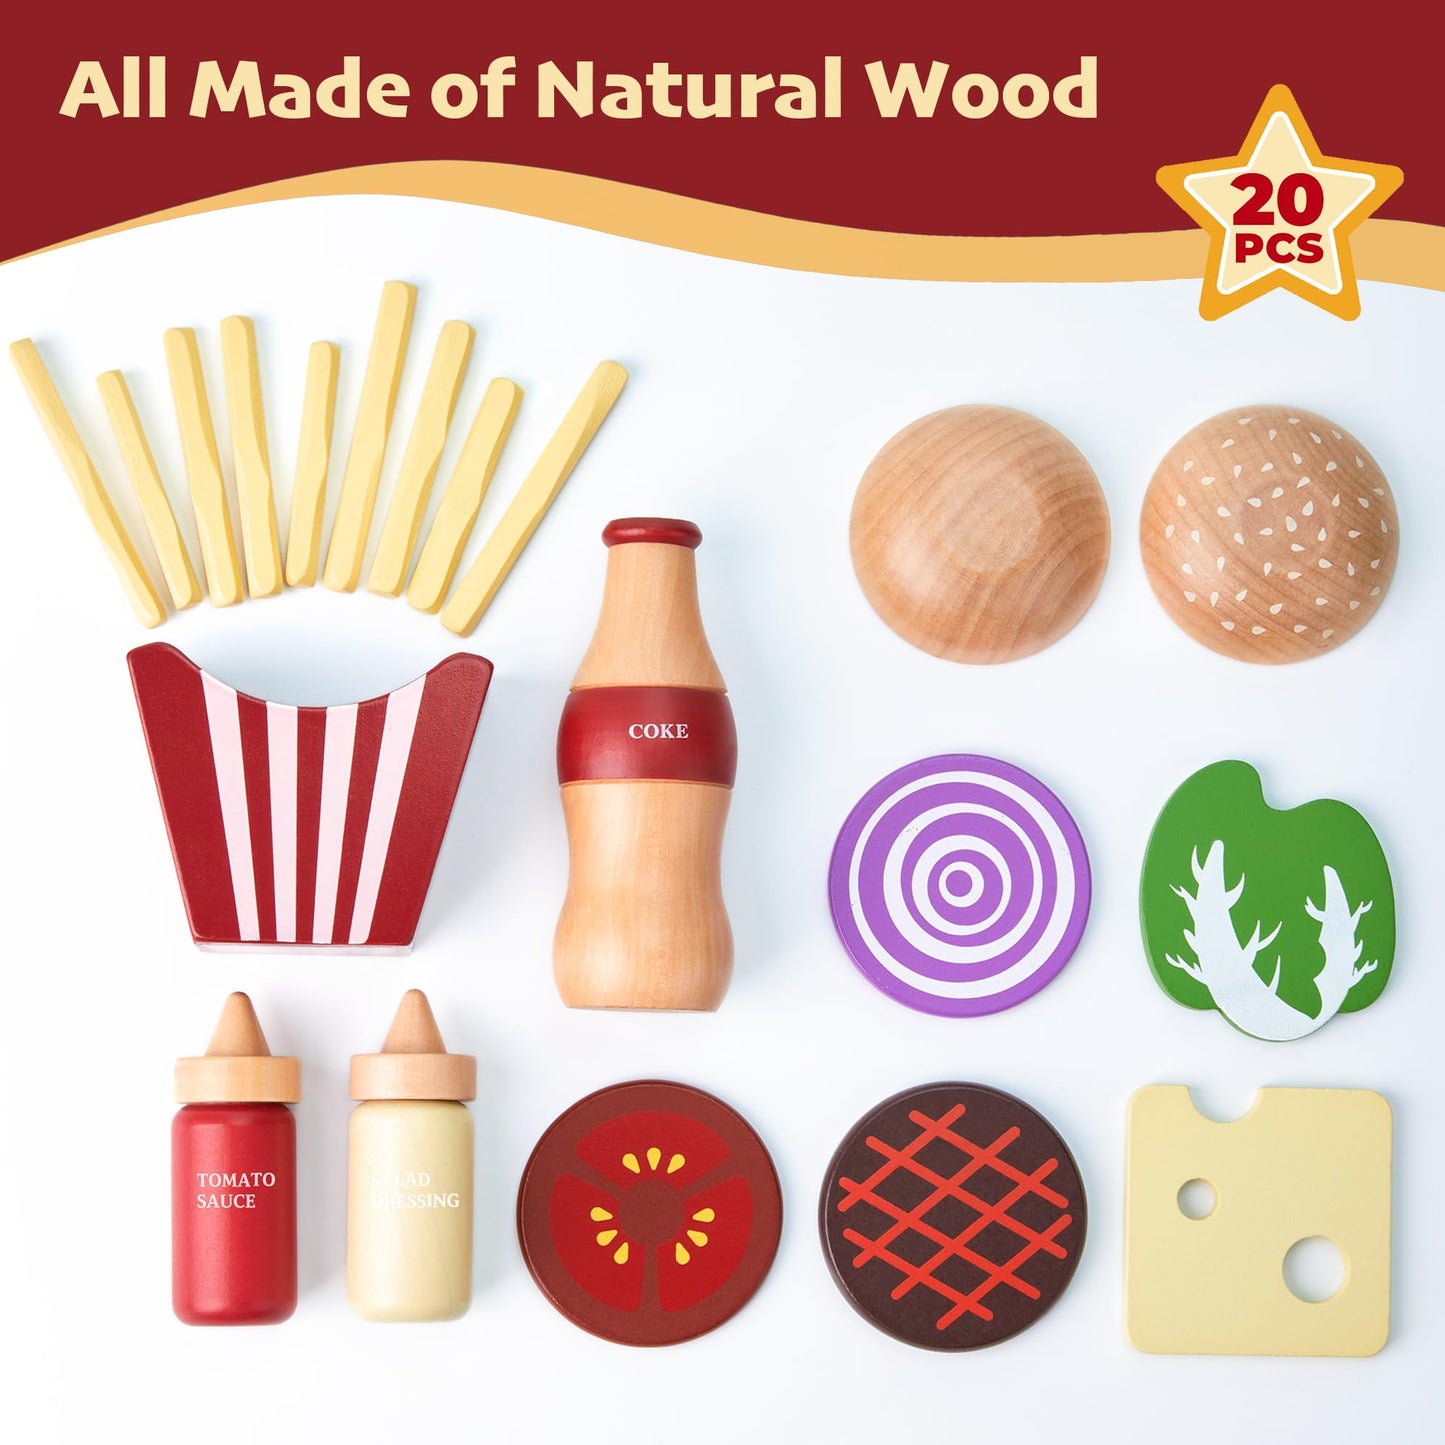 Wooden Play Food for Kids Pretend Hamburger Set Fast Food Toy Play Kitchen Accessories for Toddlers Toy Food Gift for Boys Girls Educational Toys